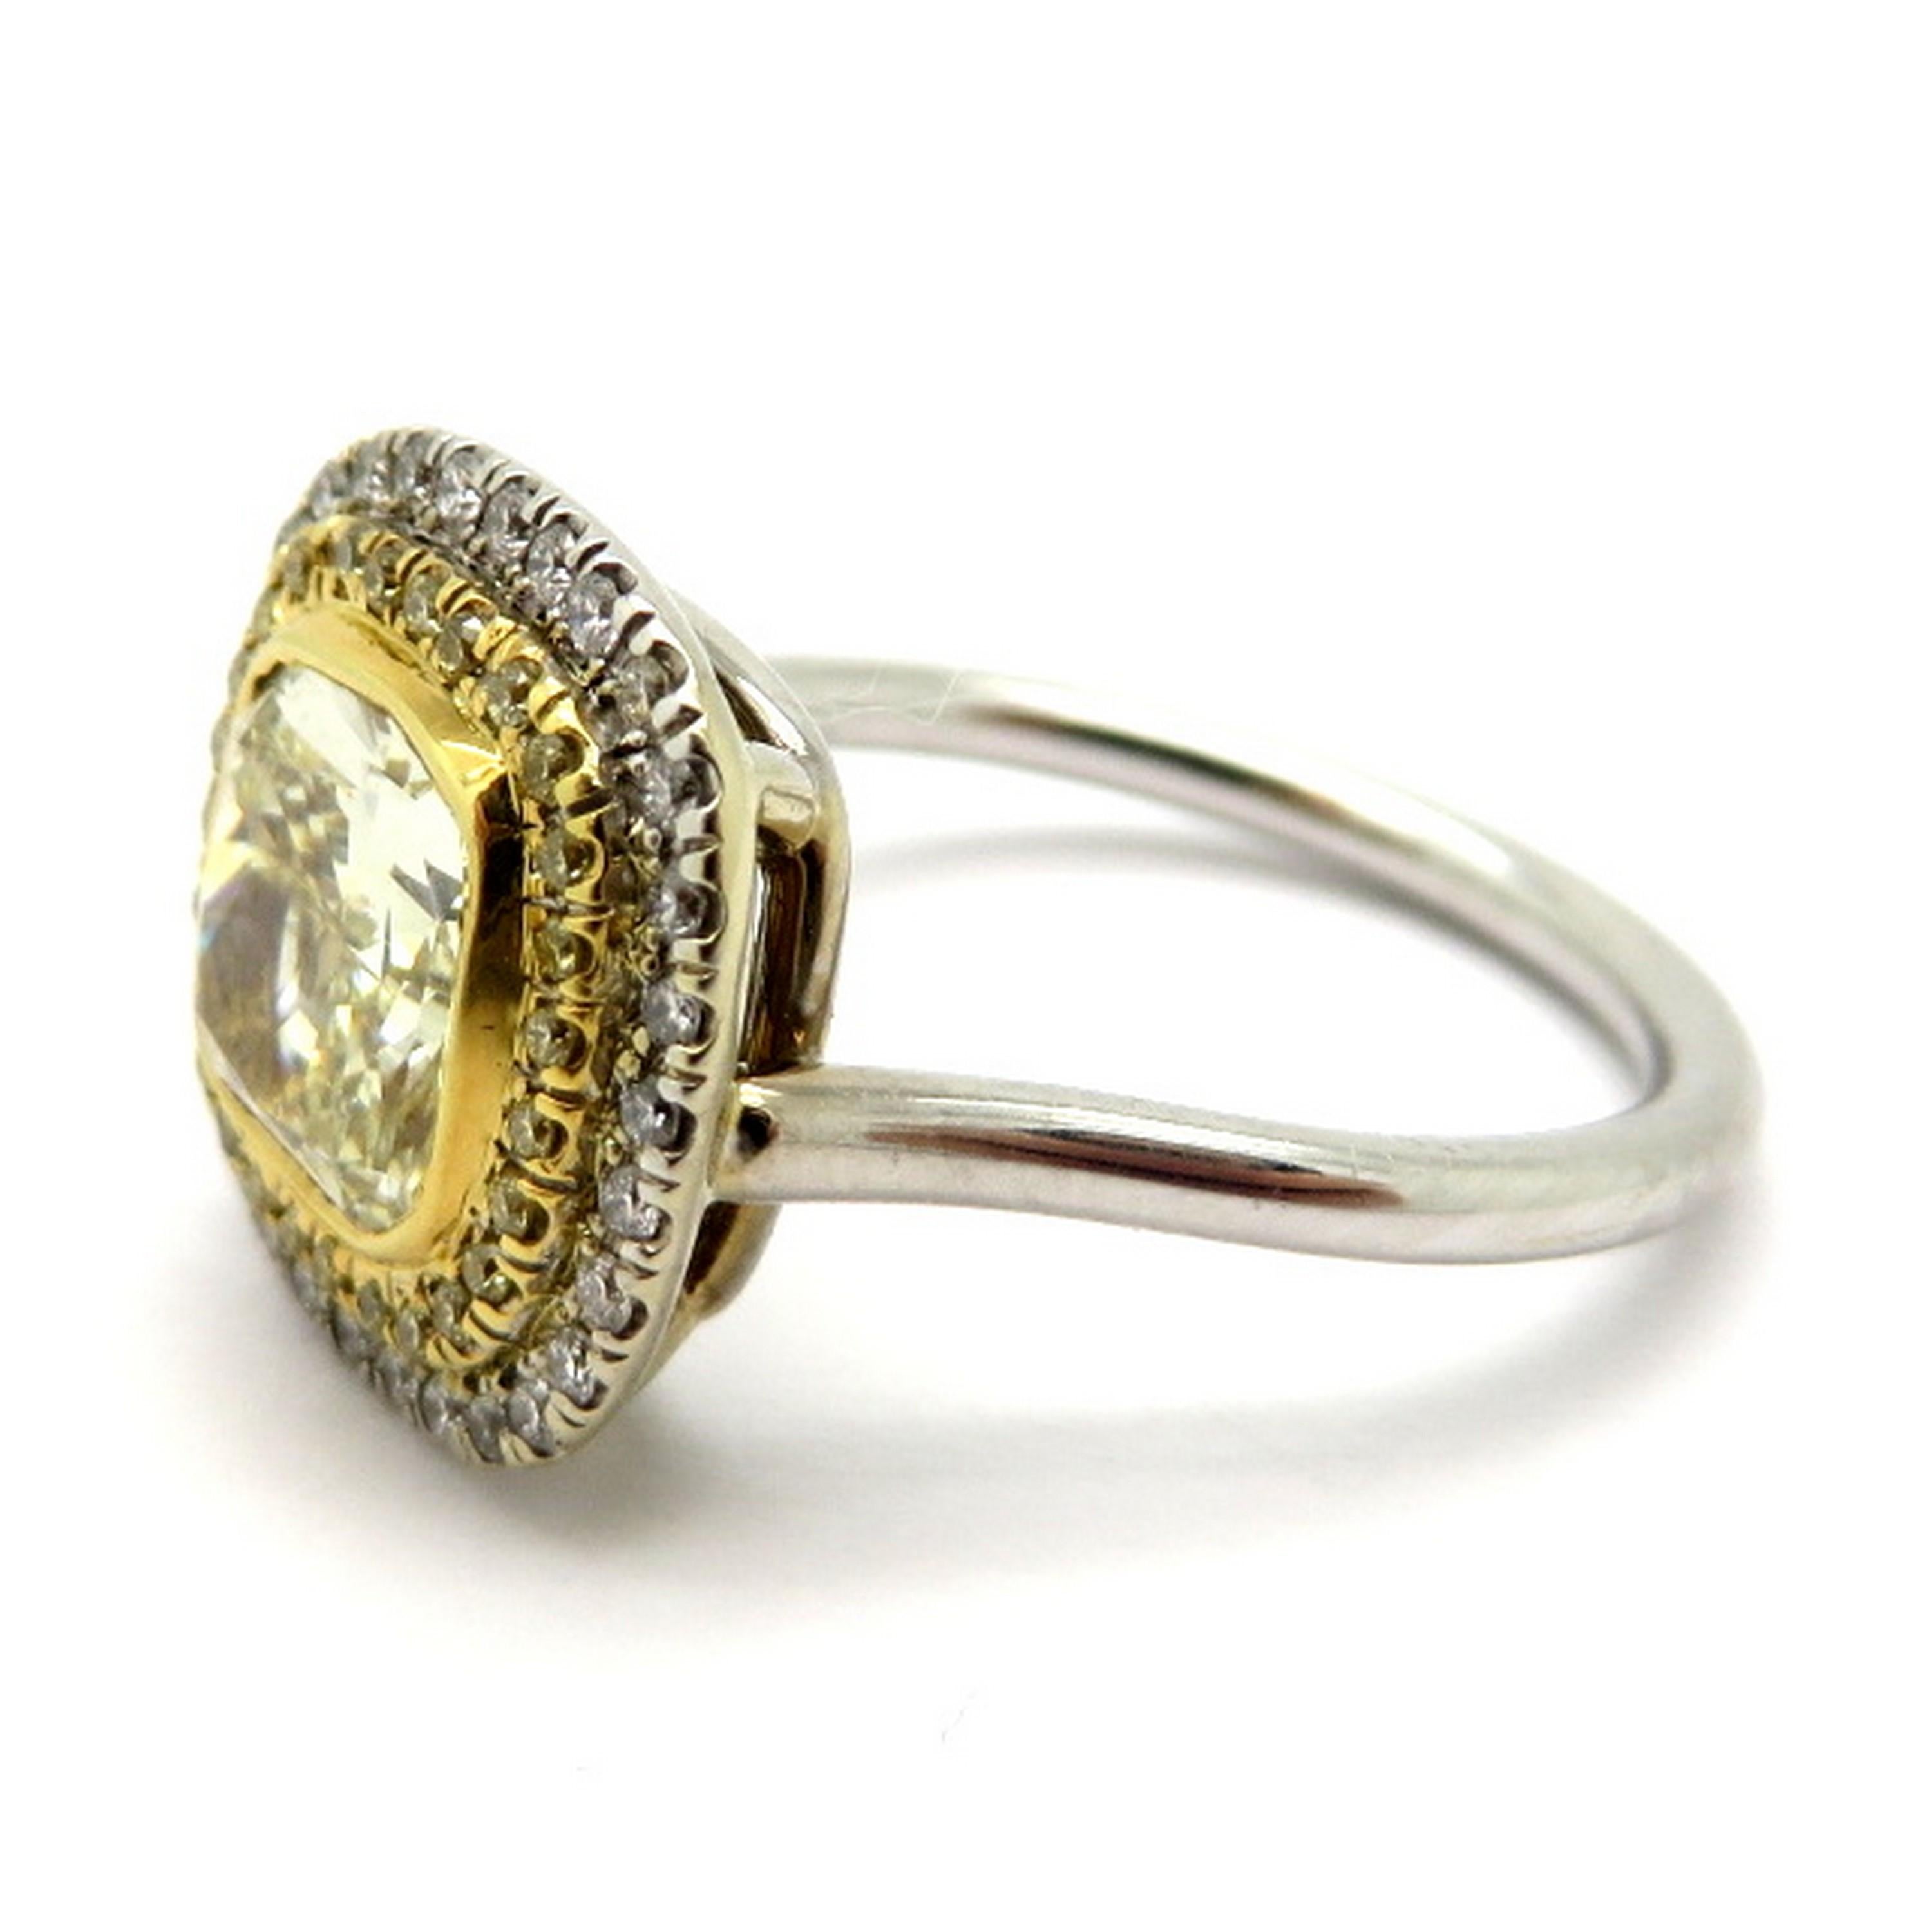 Estate 18K two-tone yellow radiant cut diamond halo engagement ring. Showcasing one fancy light yellow radiant cut diamond, bezel set, having VS1 clarity grade, weighing approximately 2.08 carats. Accented with 27 fancy yellow round brilliant cut